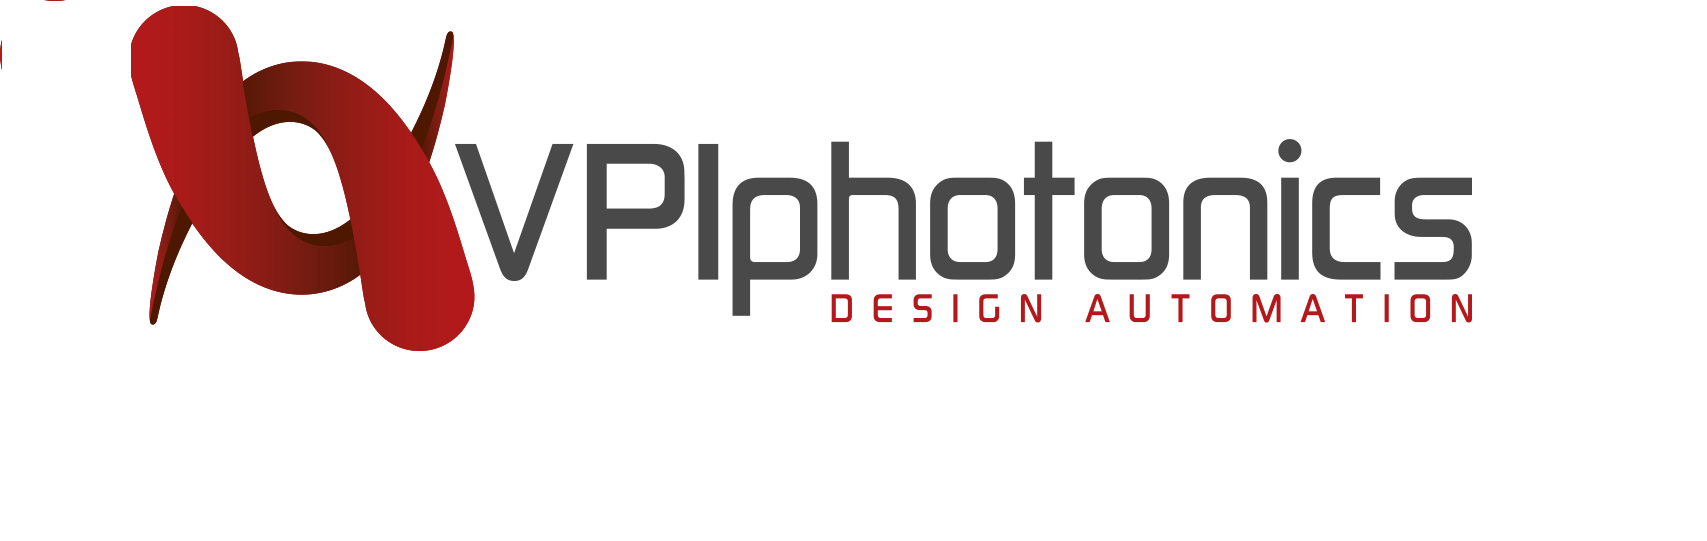 Photonics Software Business Relocates US Office to Rochester, NY